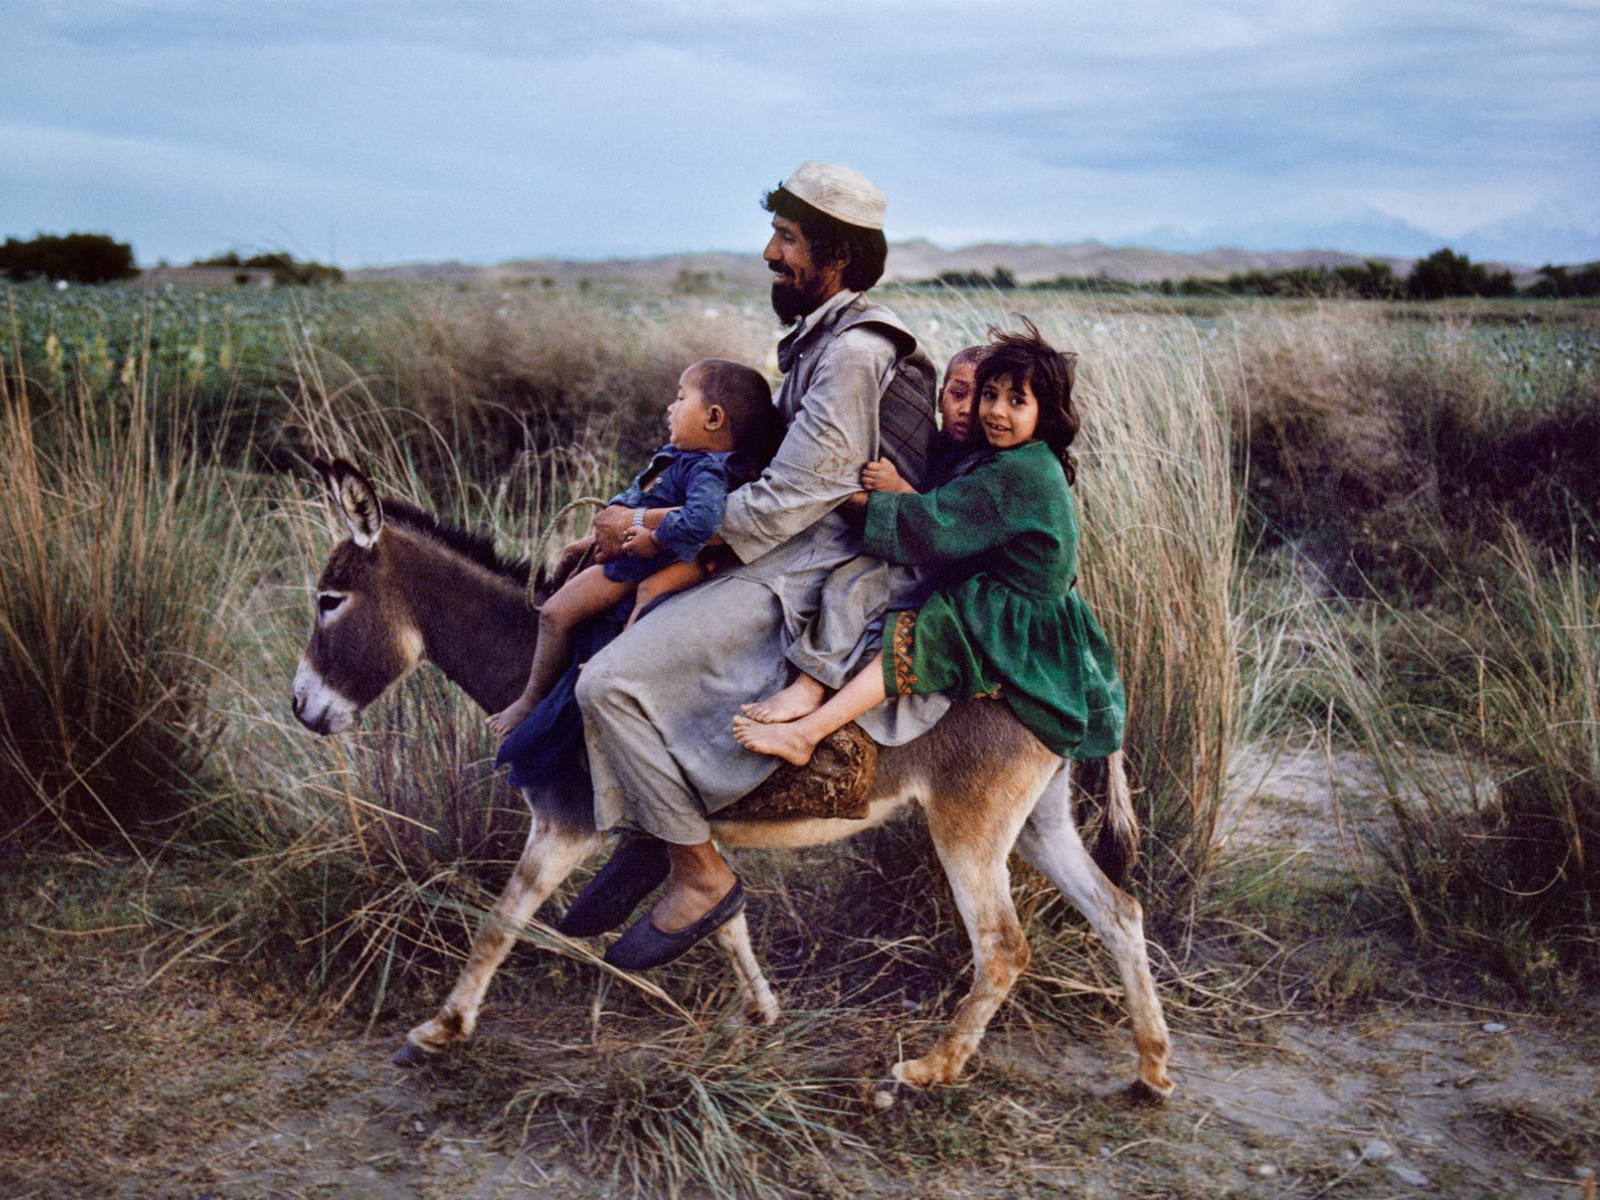 Photography people in afghanistan